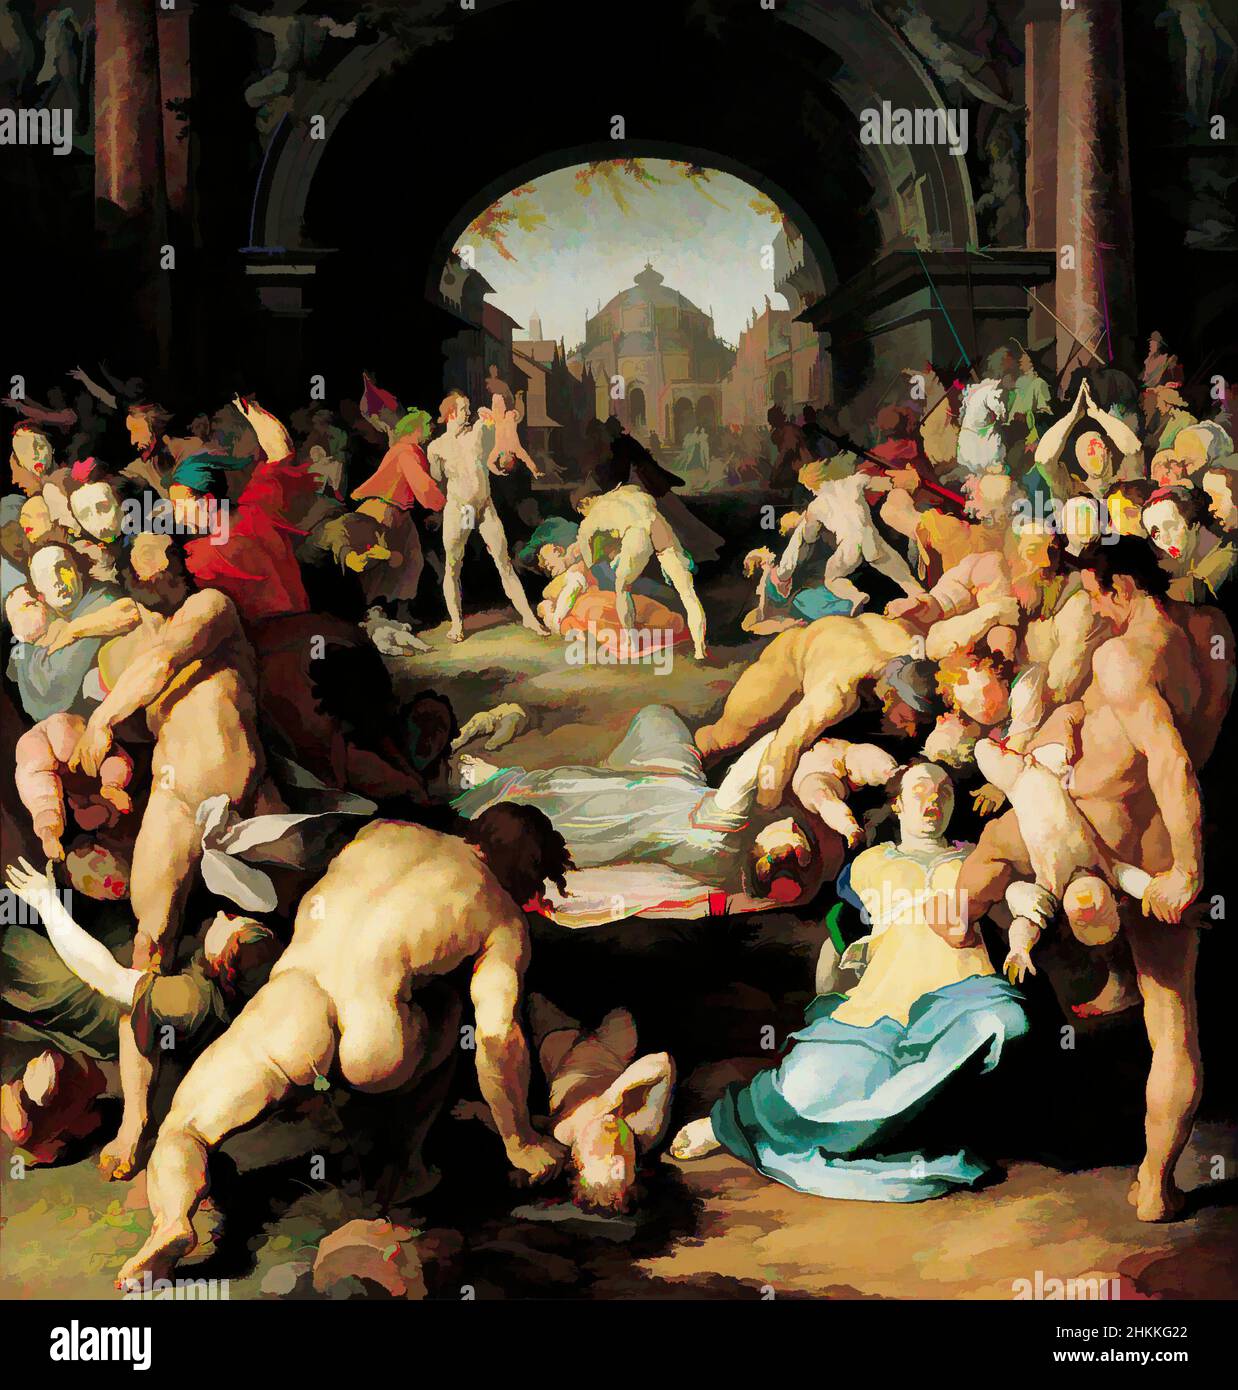 Art inspired by The infanticide in Bethlehem, Cornelis Cornelisz van Haarlem, 1591, Classic works modernized by Artotop with a splash of modernity. Shapes, color and value, eye-catching visual impact on art. Emotions through freedom of artworks in a contemporary way. A timeless message pursuing a wildly creative new direction. Artists turning to the digital medium and creating the Artotop NFT Stock Photo